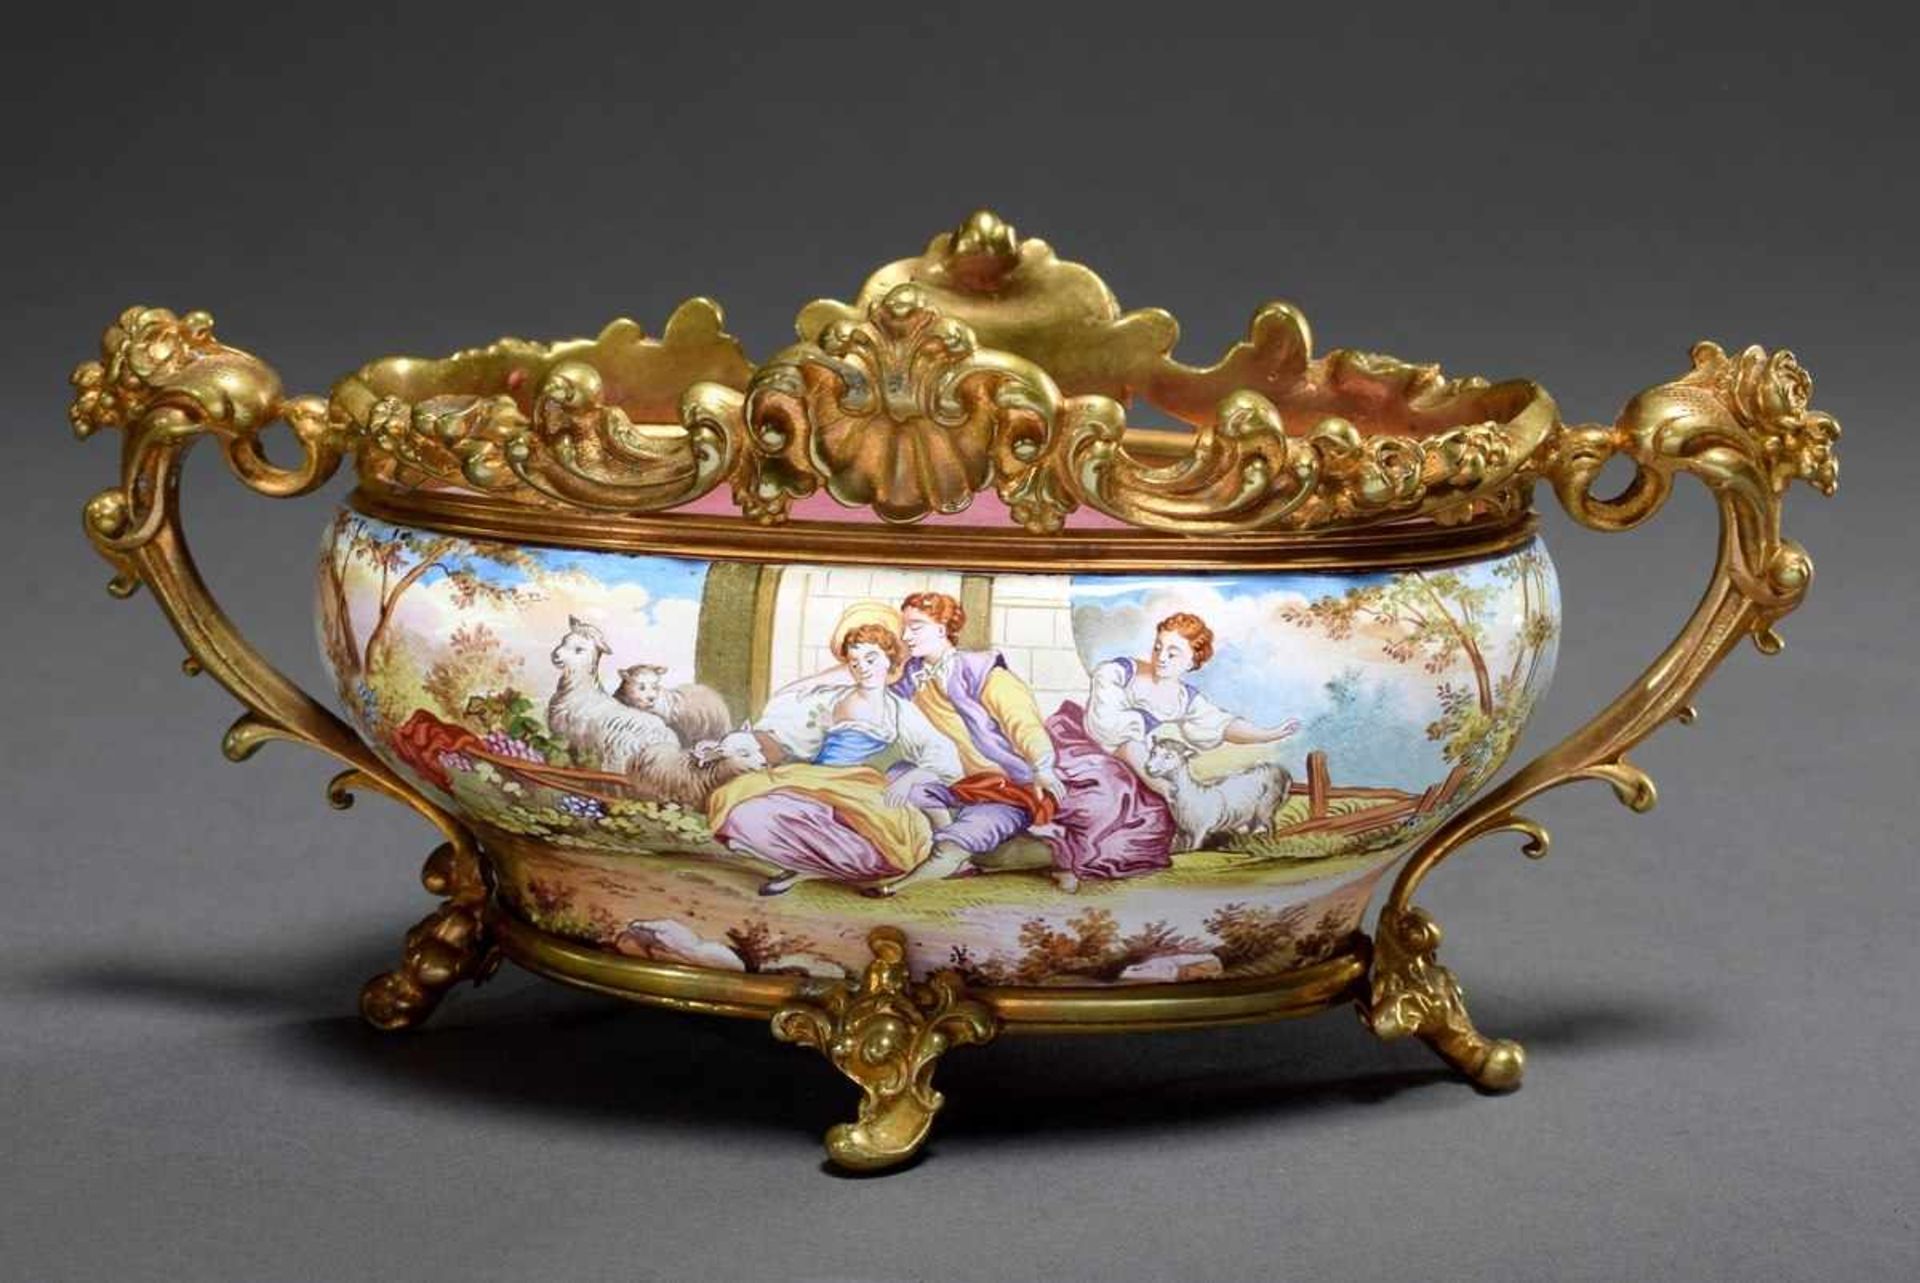 Small metal jardiniere with polychrome enamel painting "Shepherd scene in landscape" and gilded